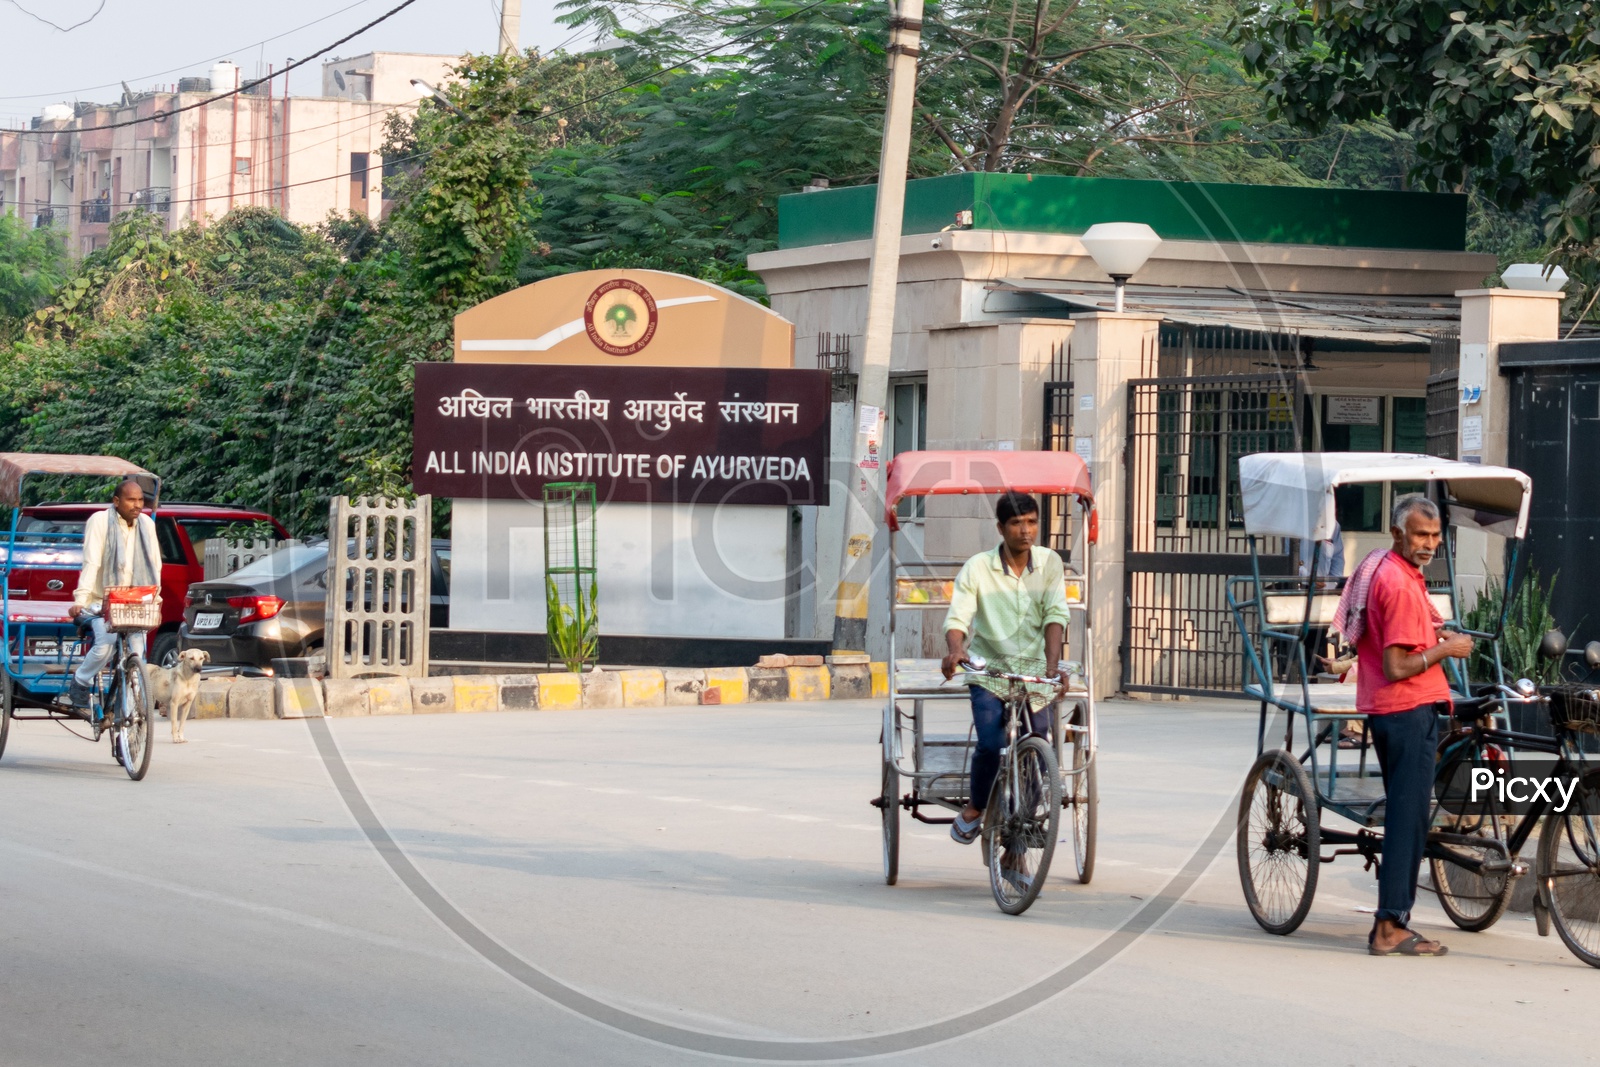 All India Institute of Ayurveda entrance and rickshaw wala